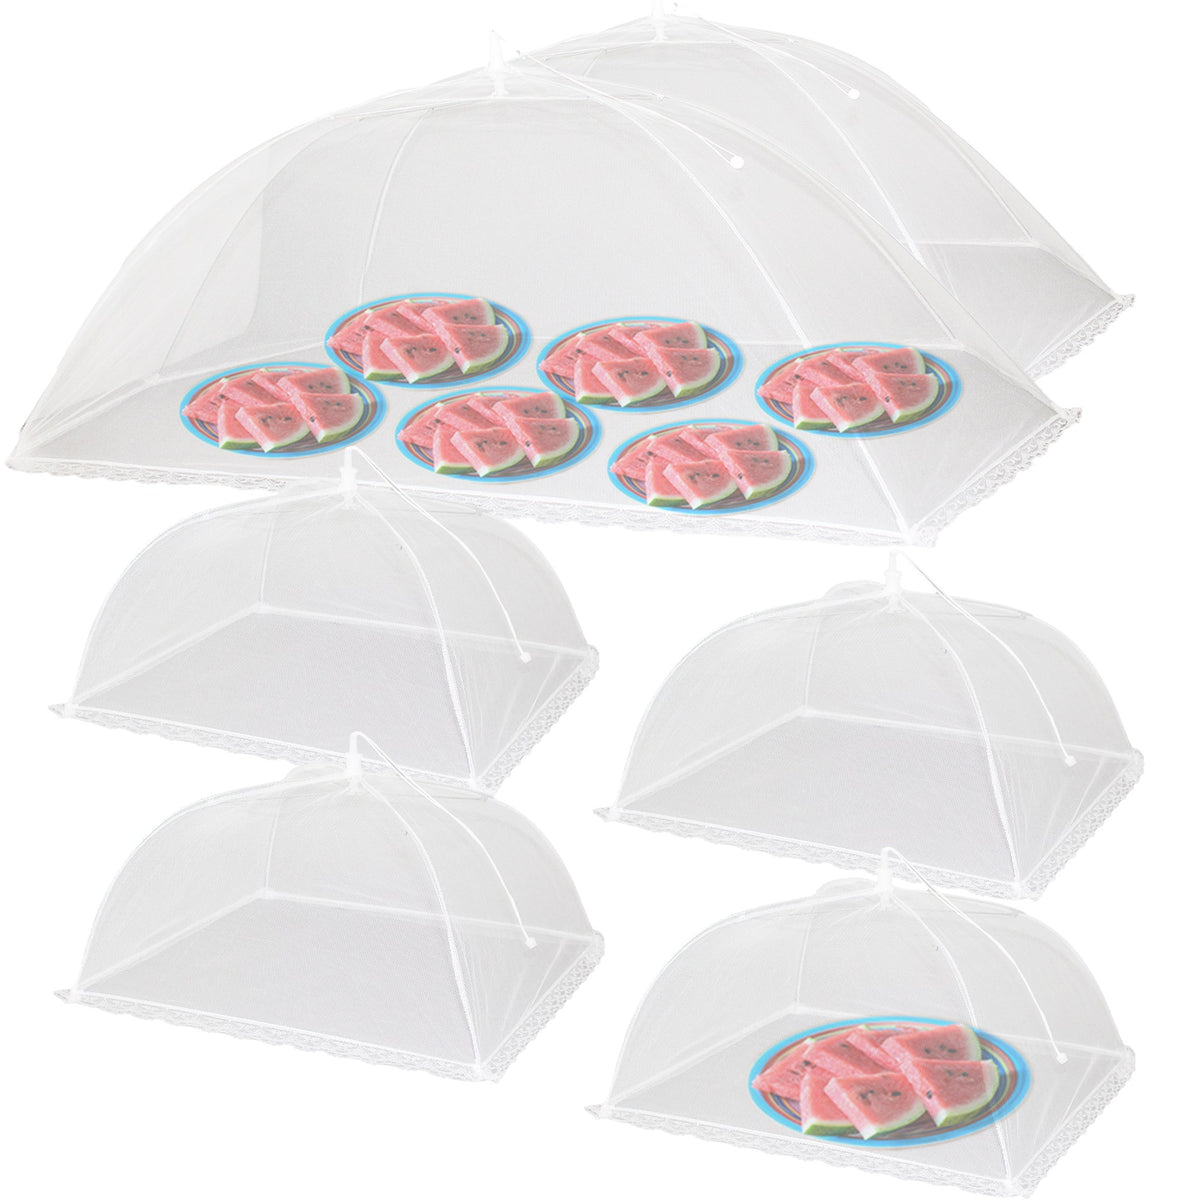 6pc Pop-Up Large & Jumbo Outdoor Food Tent Covers - Keep Bugs Out